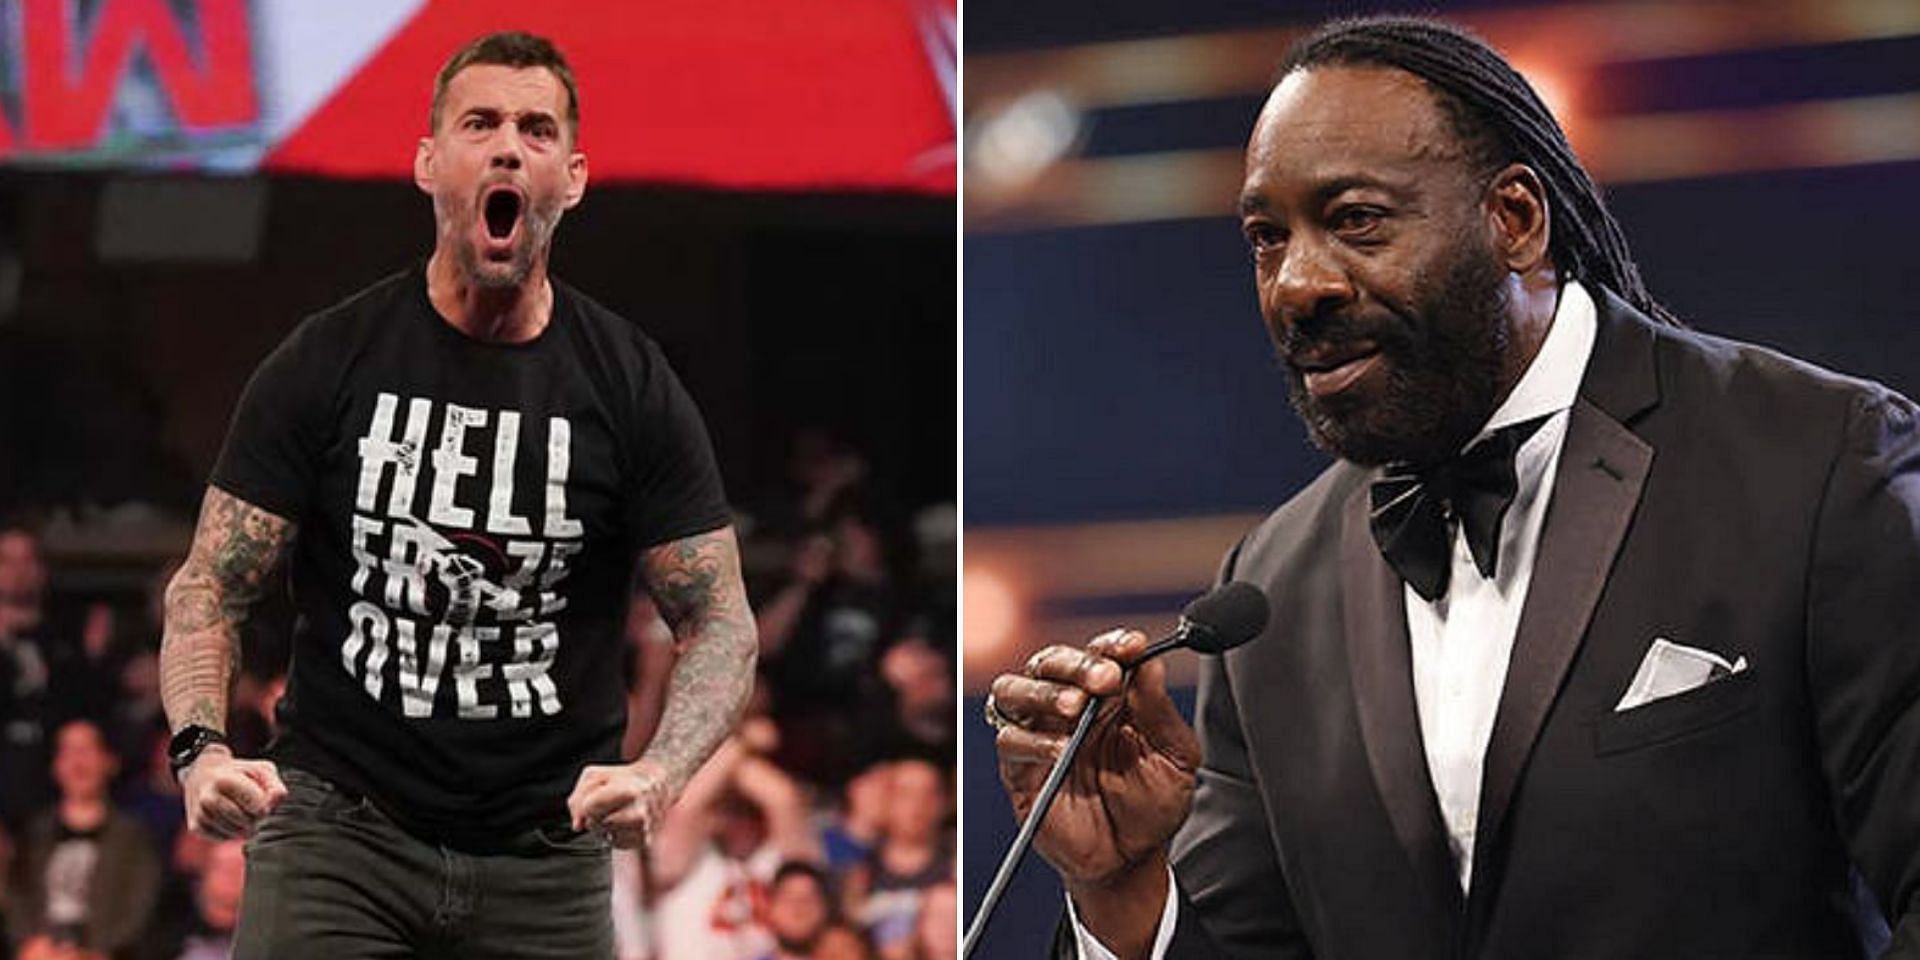 CM Punk and Booker T interacted backstage